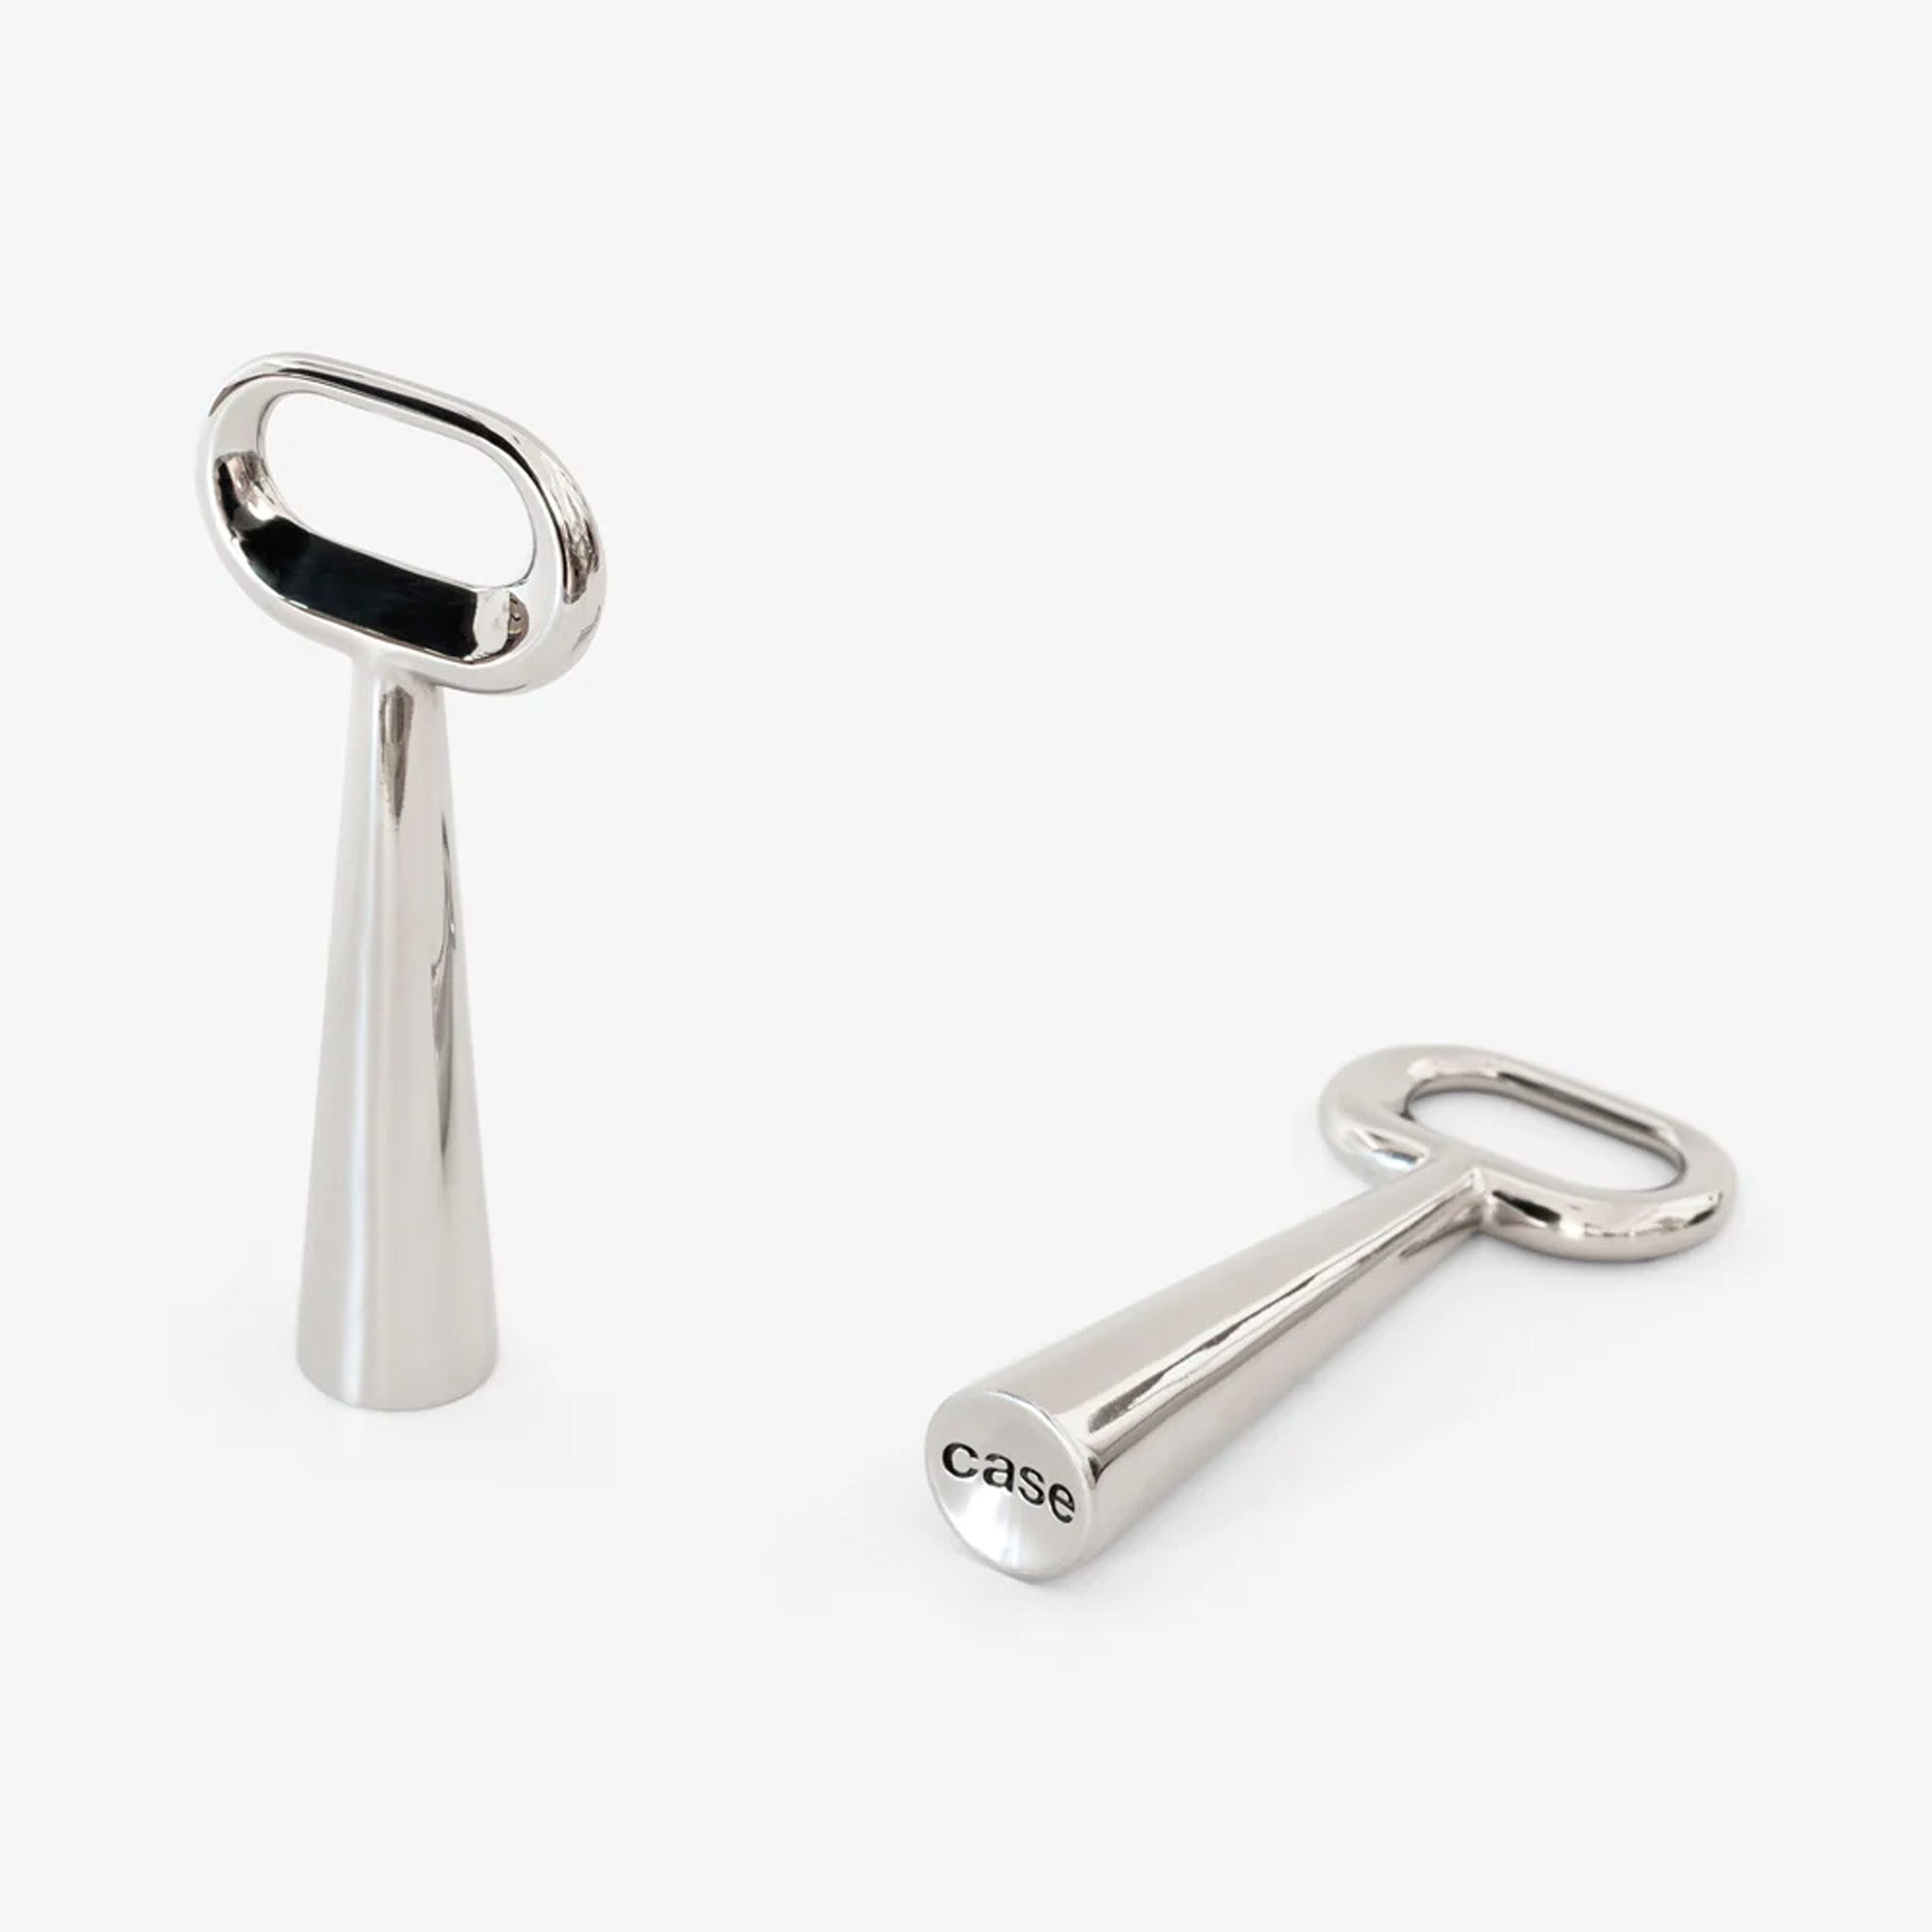 Stand Bottle Opener by Terence Woodgate for Case